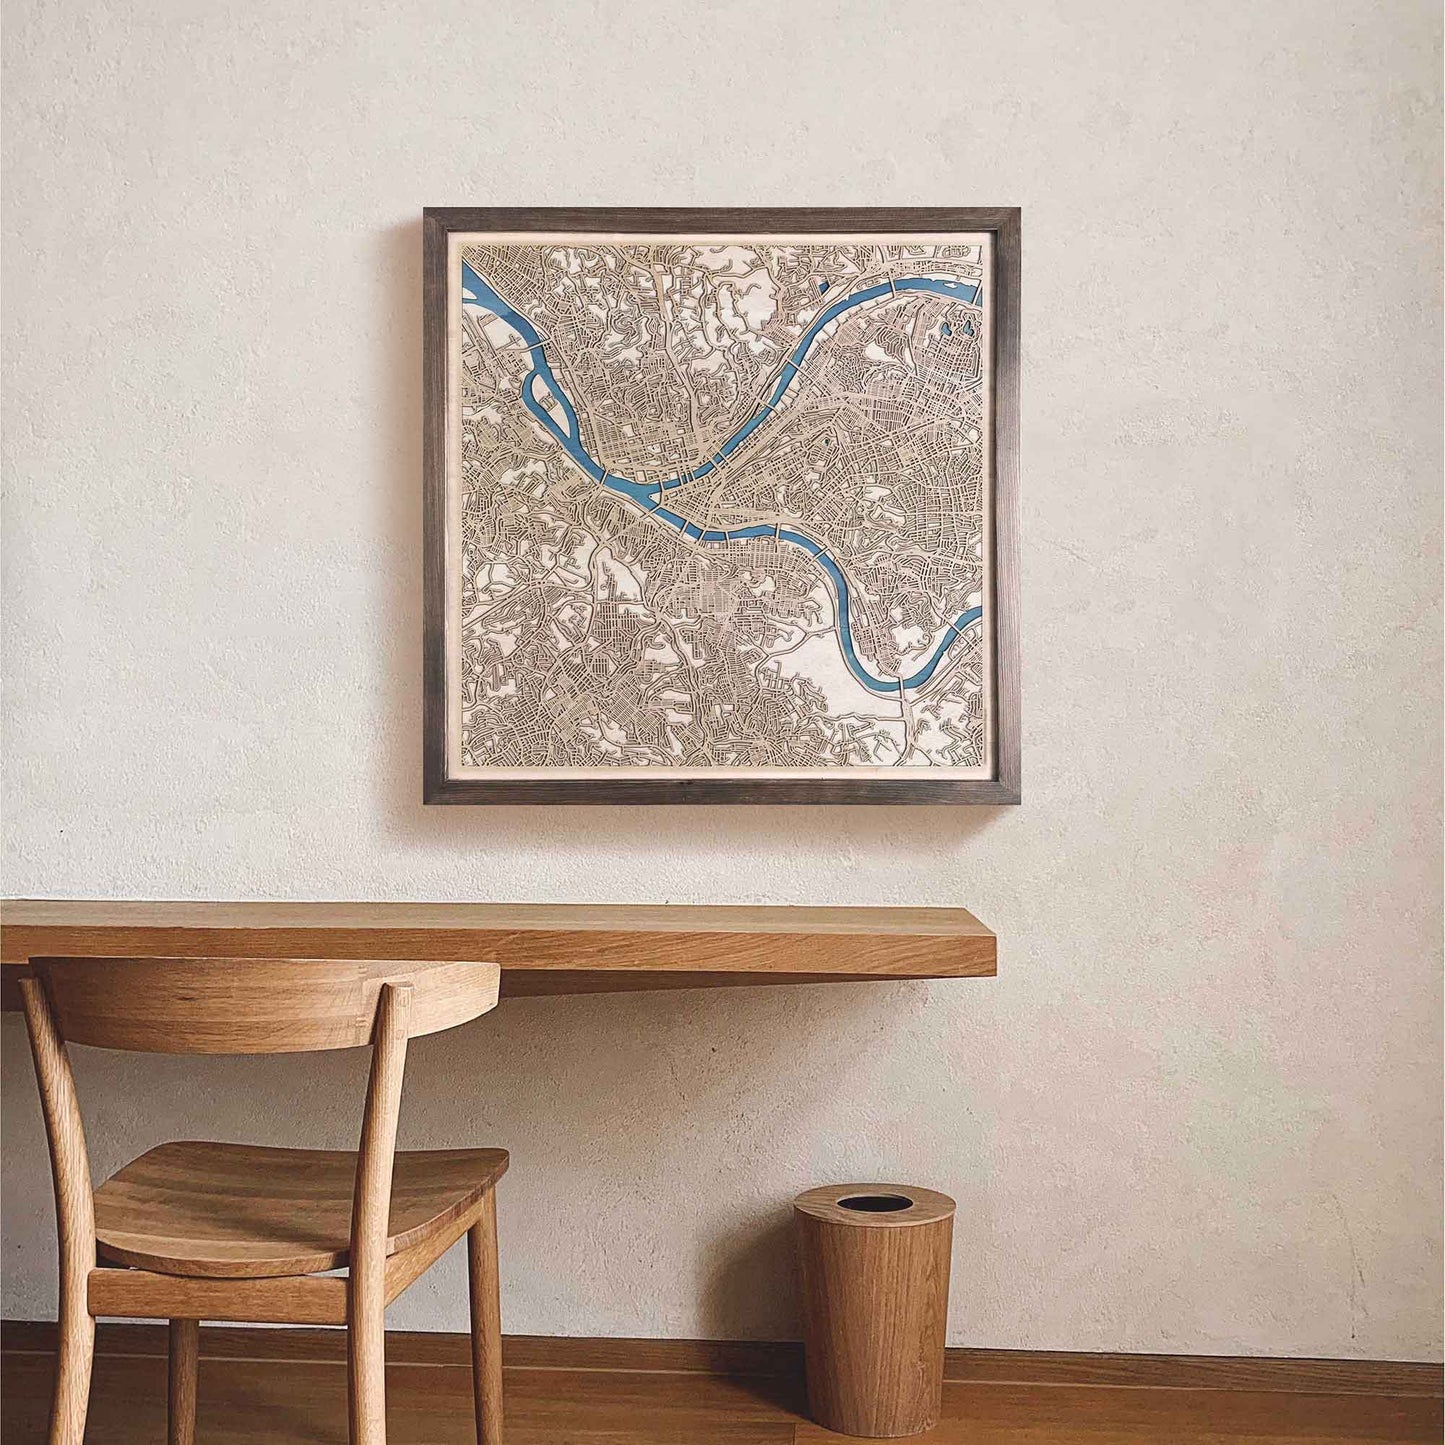 Pittsburgh Wooden Map by CityWood - Custom Wood Map Art - Unique Laser Cut Engraved - Anniversary Gift